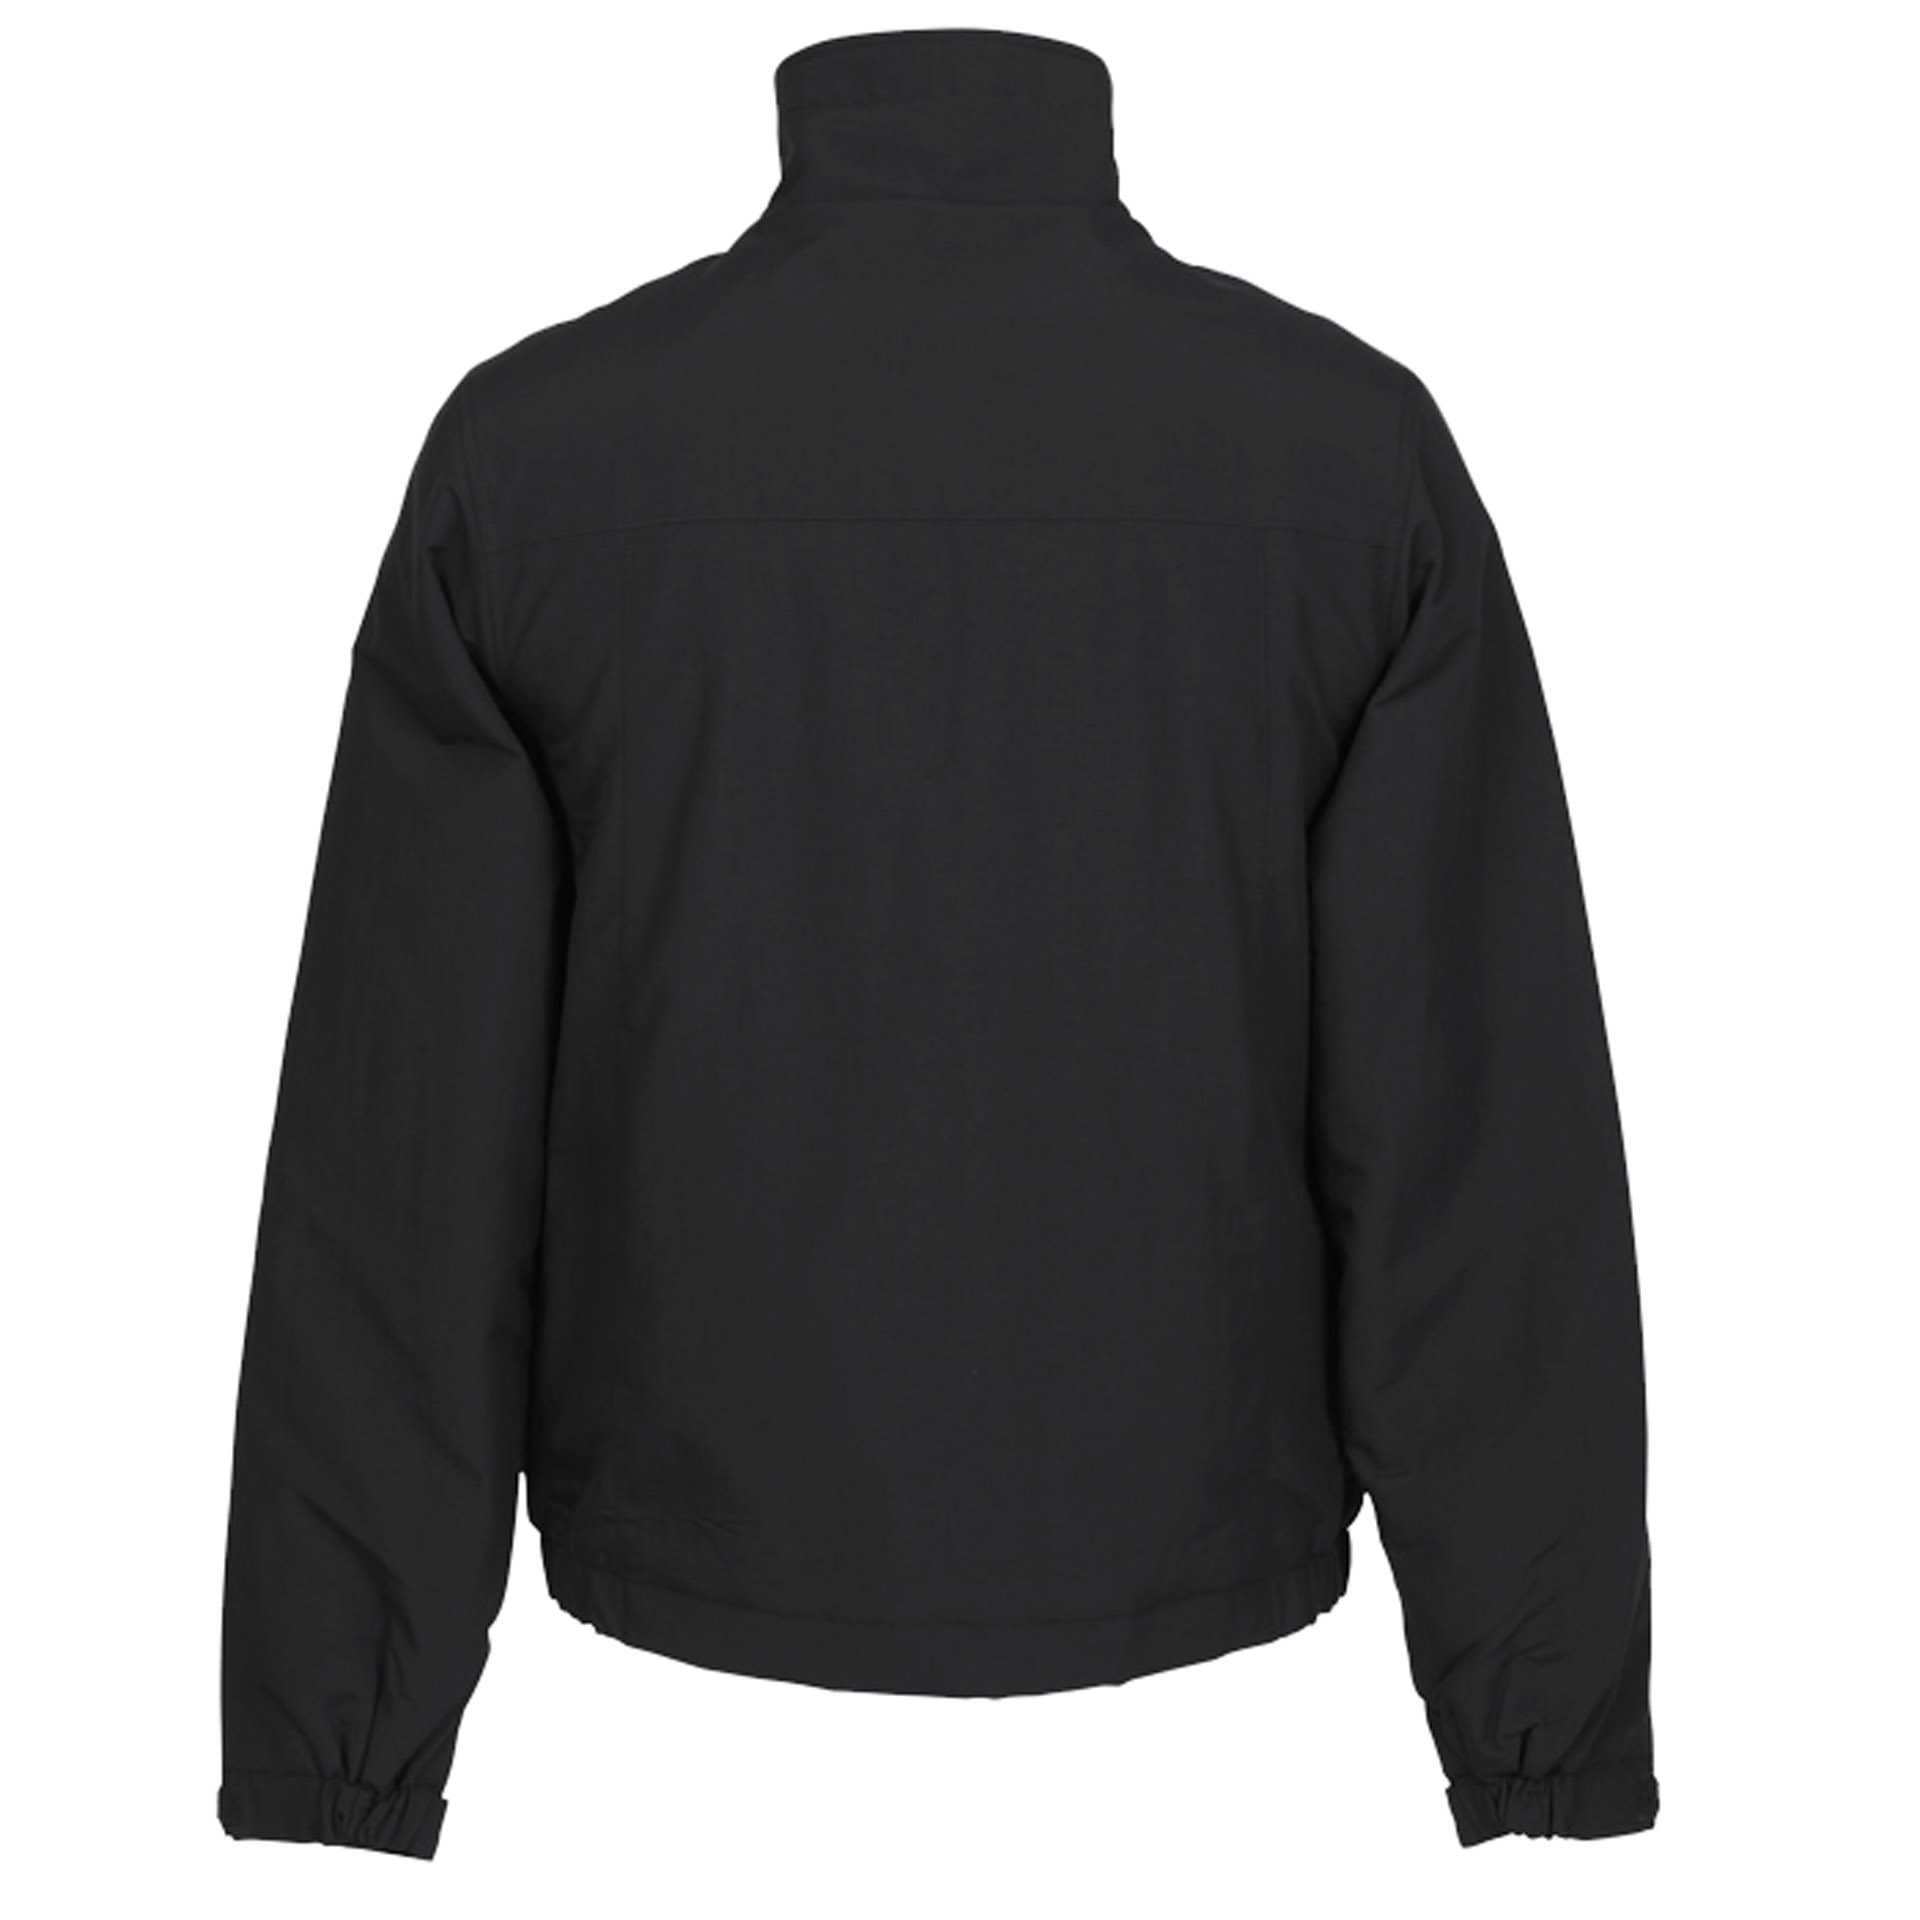 Eddie Bauer Insulated Jacket - Black - Low Stock, Check Sizes ...